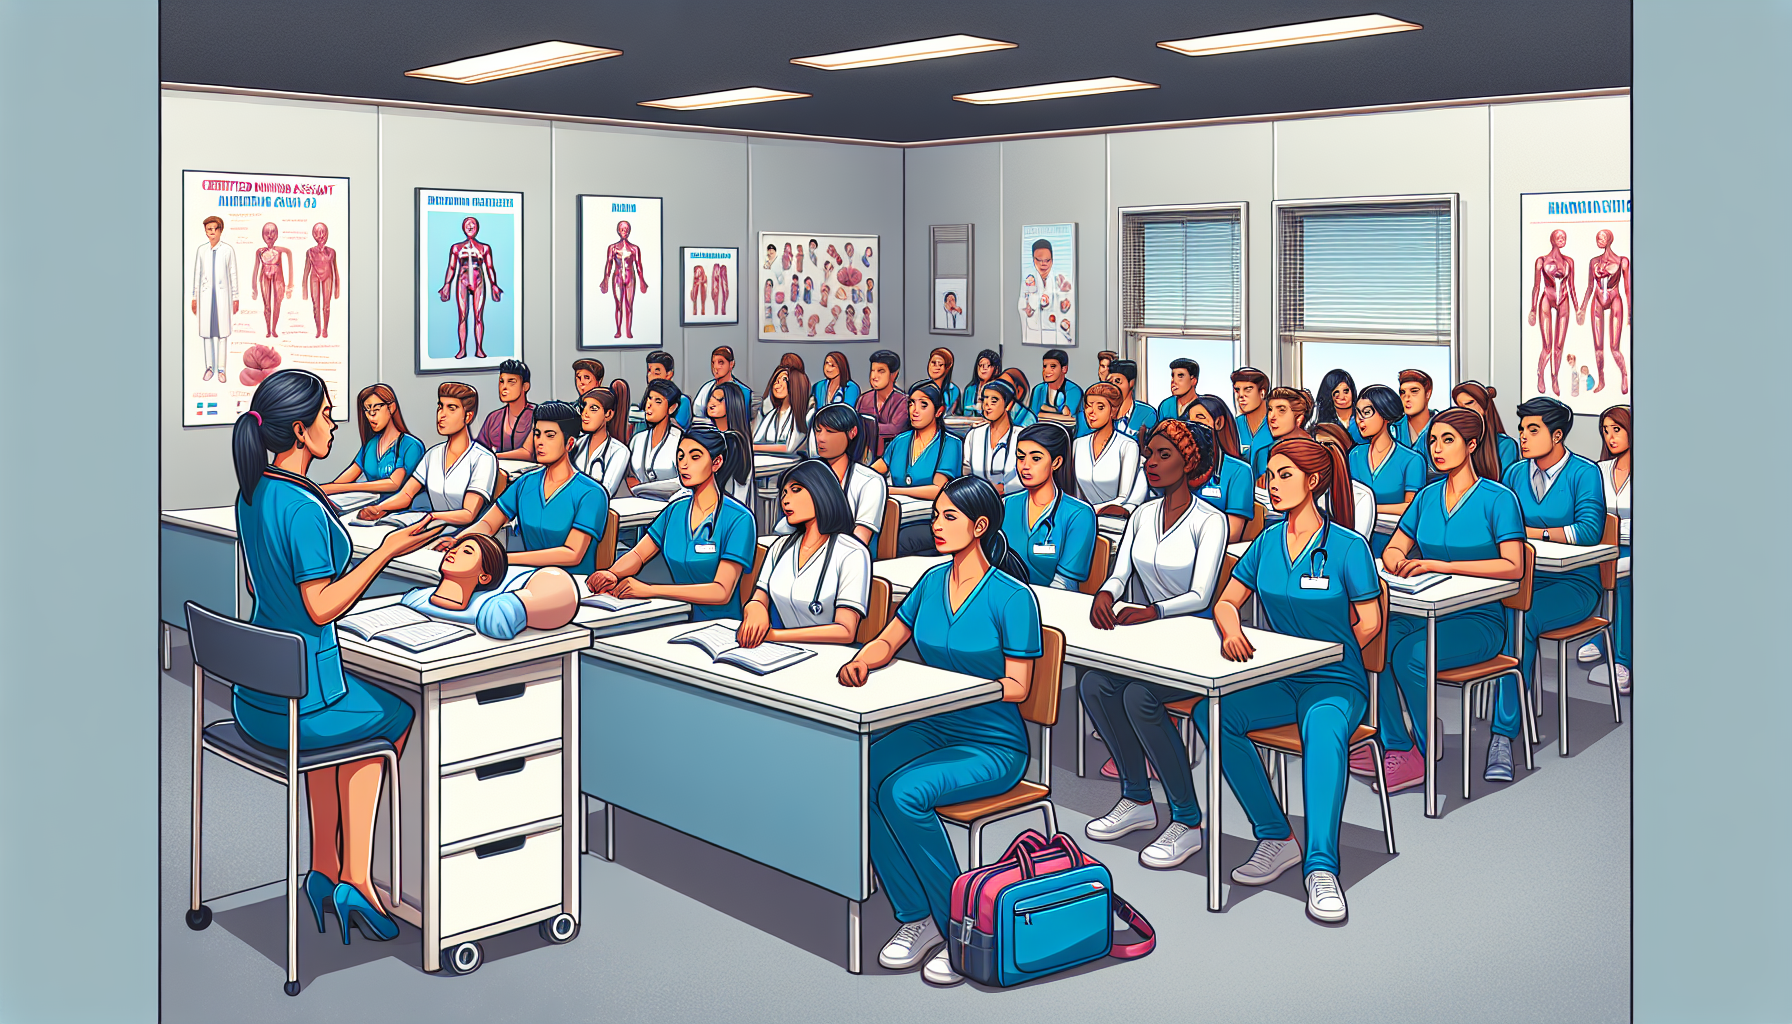 Illustration of a classroom lecture in CNA training program